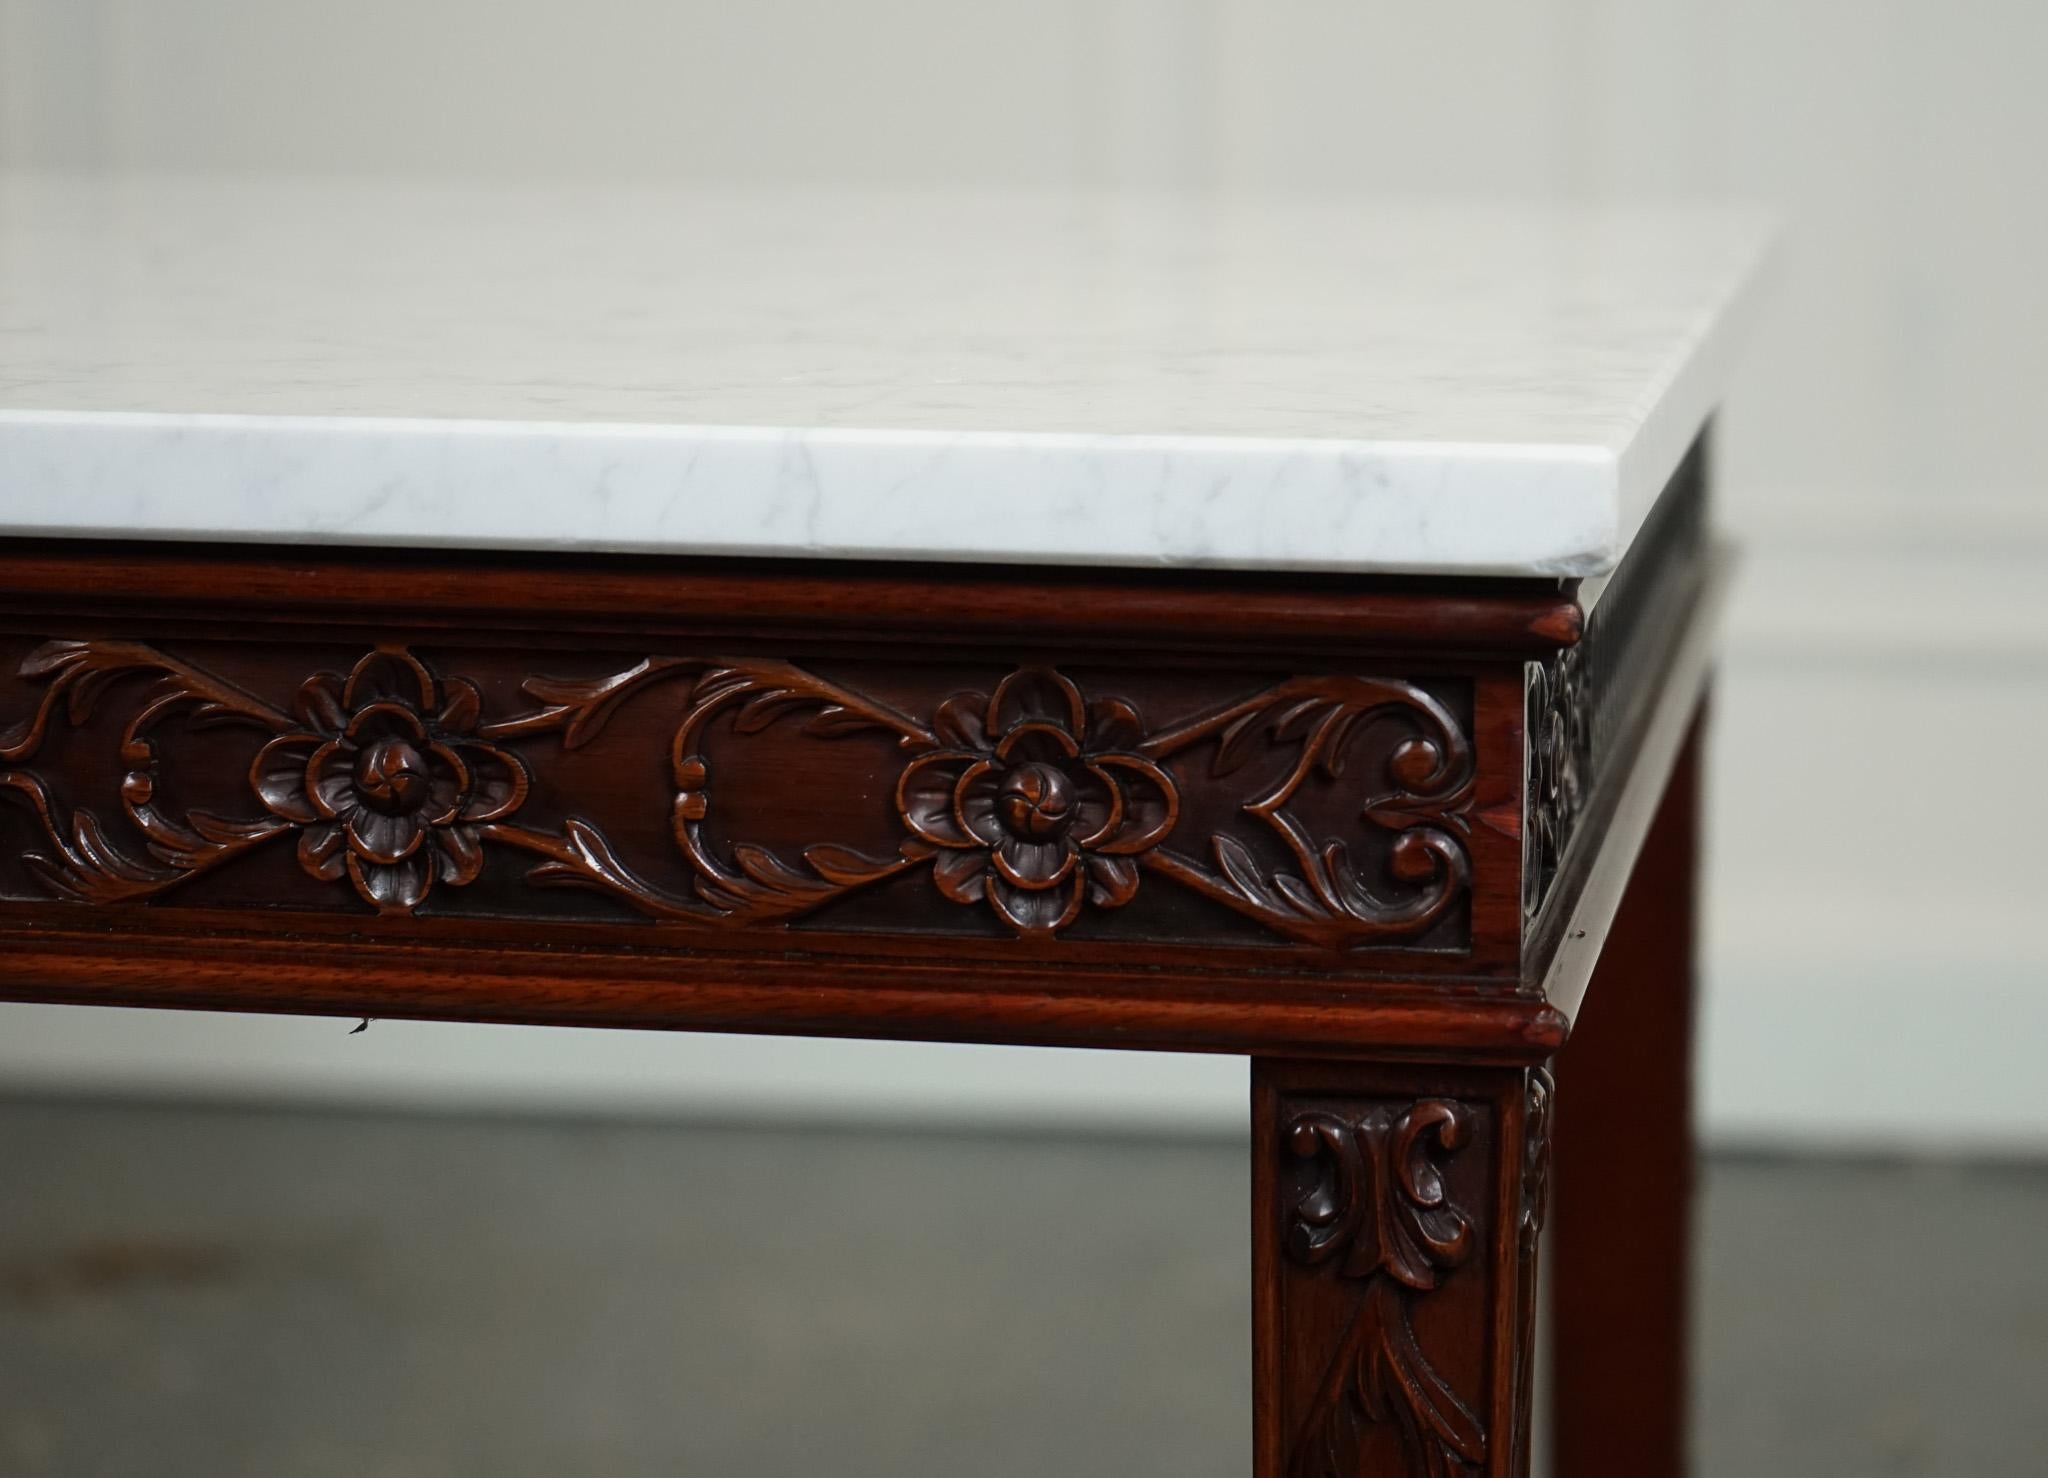 PAiR OF CHIPPENDALE STYLE CONSOLE TABLES WITH NEW WHITE CARRARA MARBLE TOPS For Sale 6